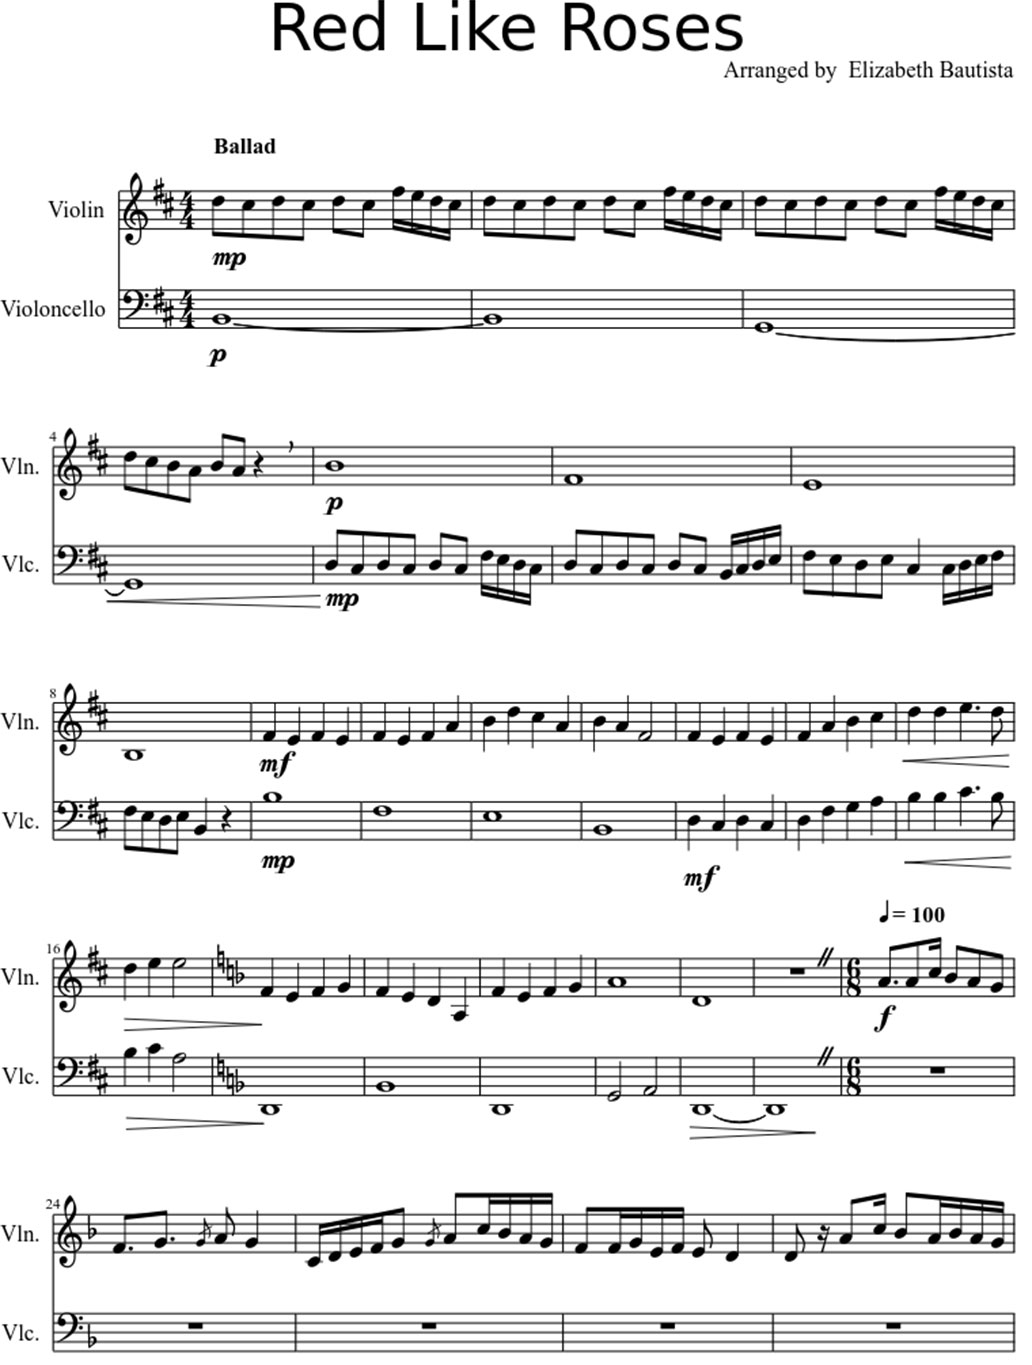 Red like roses sheet music notes 1